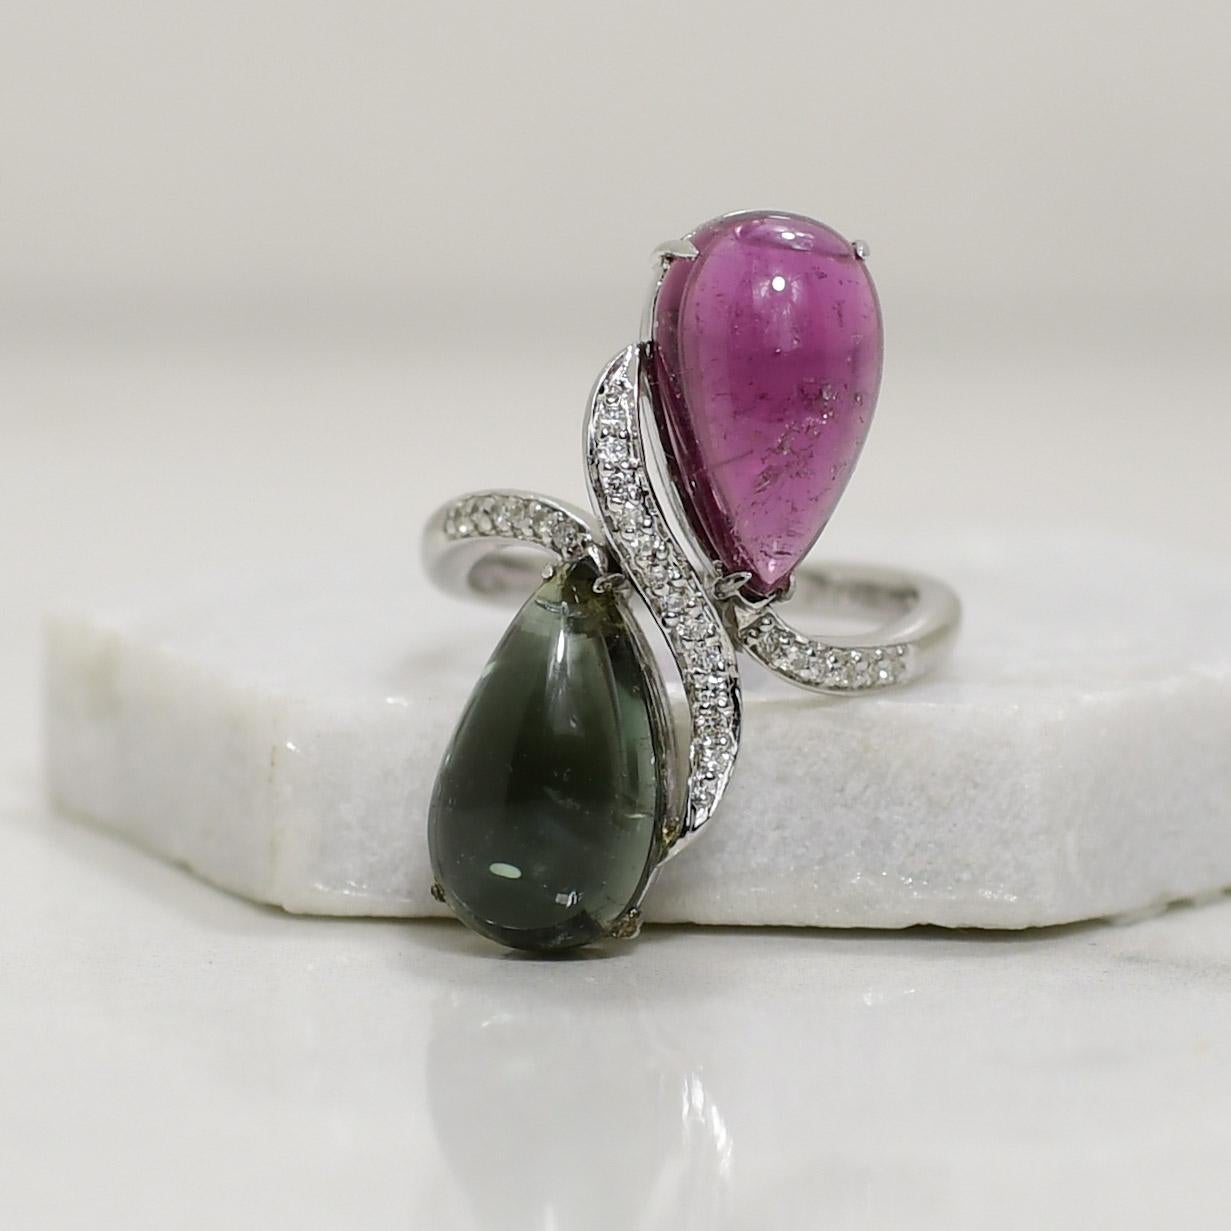 This exquisite 14K vintage white gold ring captures timeless elegance with its enchanting design. The centerpiece features a lustrous pear-shaped cabochon cut gemstone, combining rich green and regal purple hues, creating a captivating play of